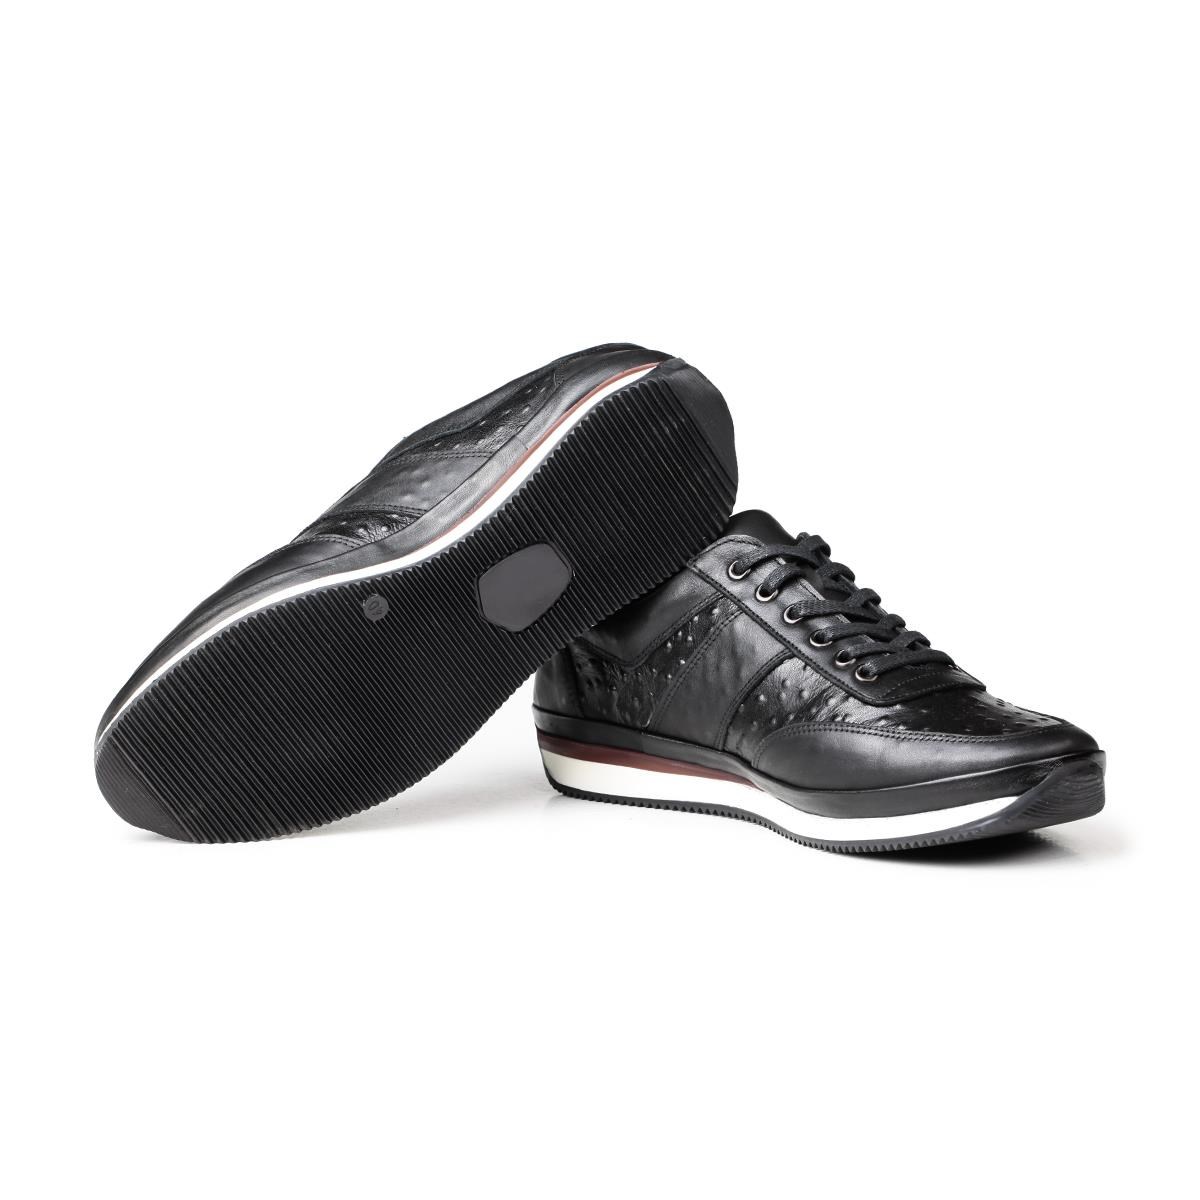 Ducavelli Ostrich Plane Genuine Leather Men's Casual Shoes